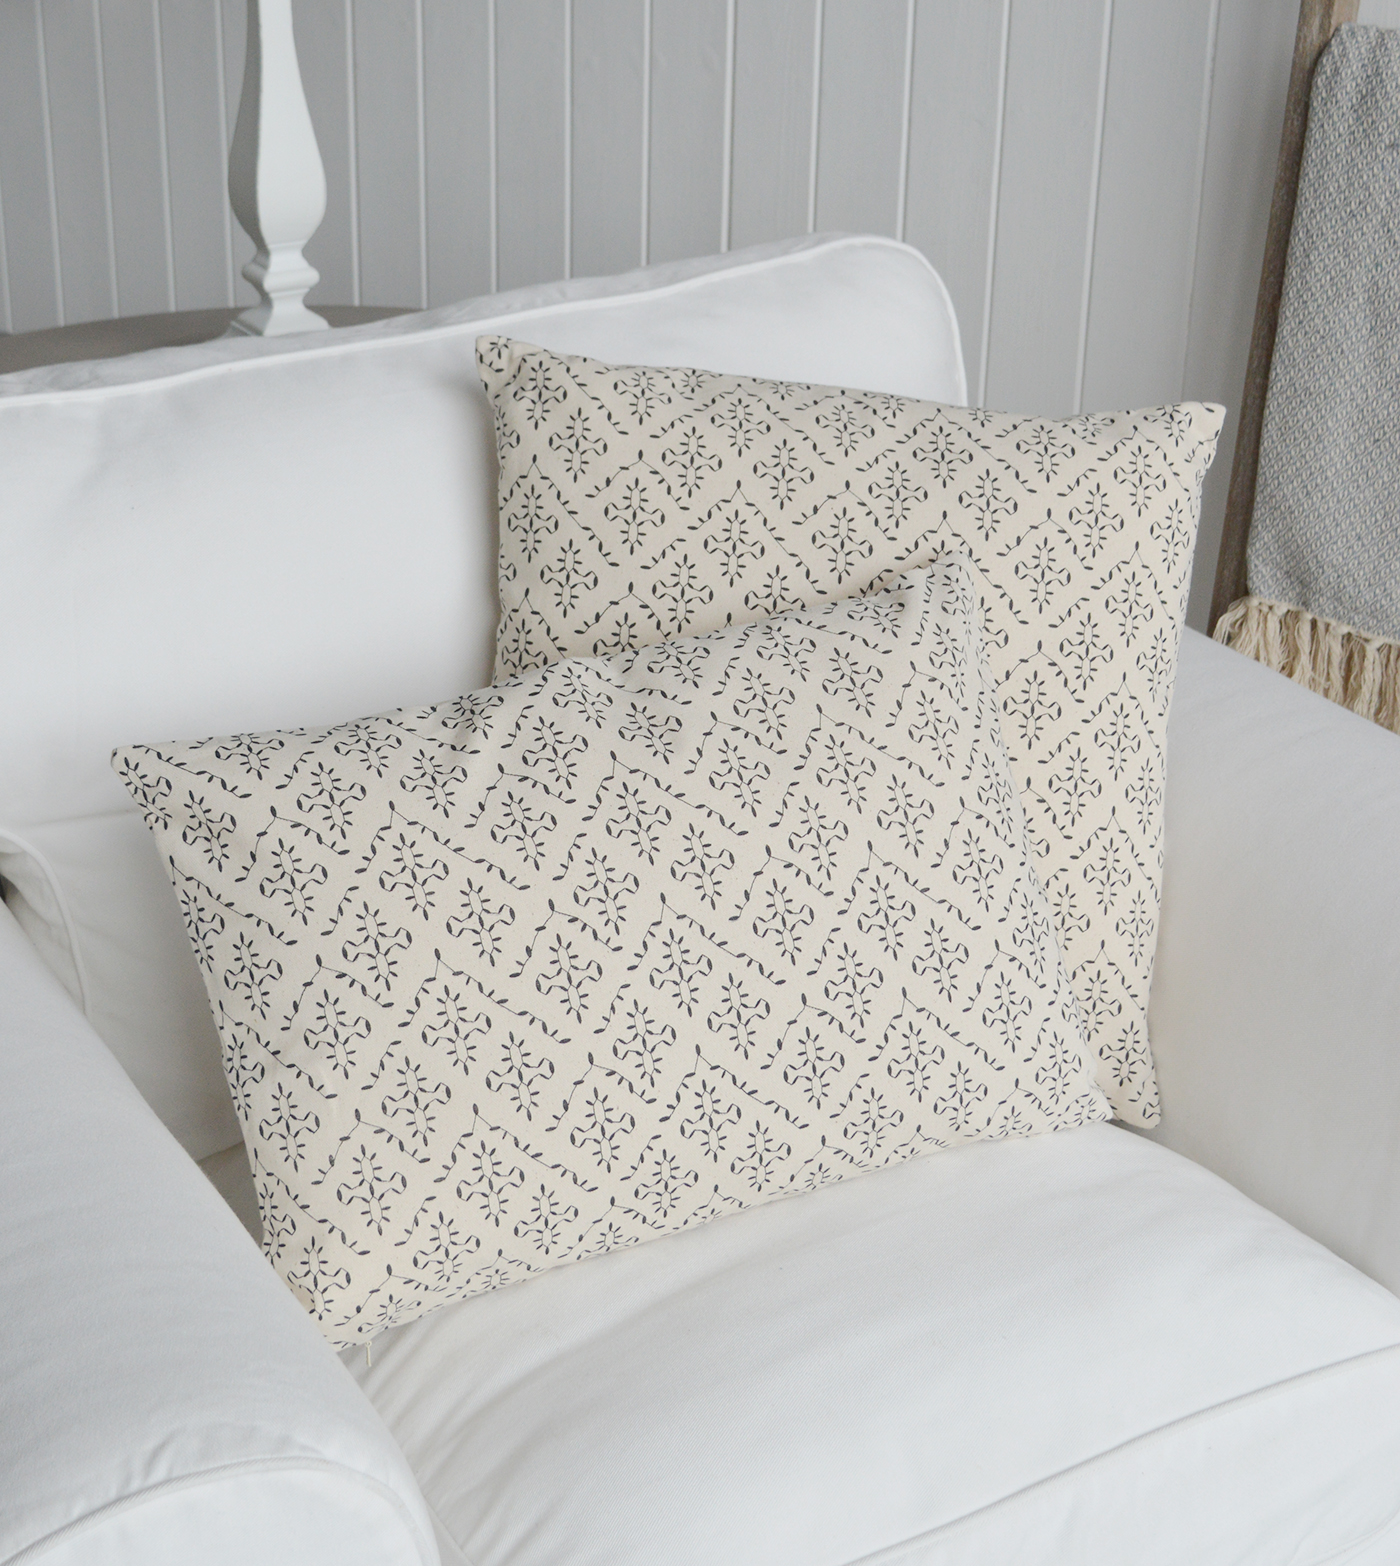 New England Style Country, Coastal and White Furniture and accessories for the home. New England cushions and soft furnishing - Lexington Cushion Cover in linen and navy